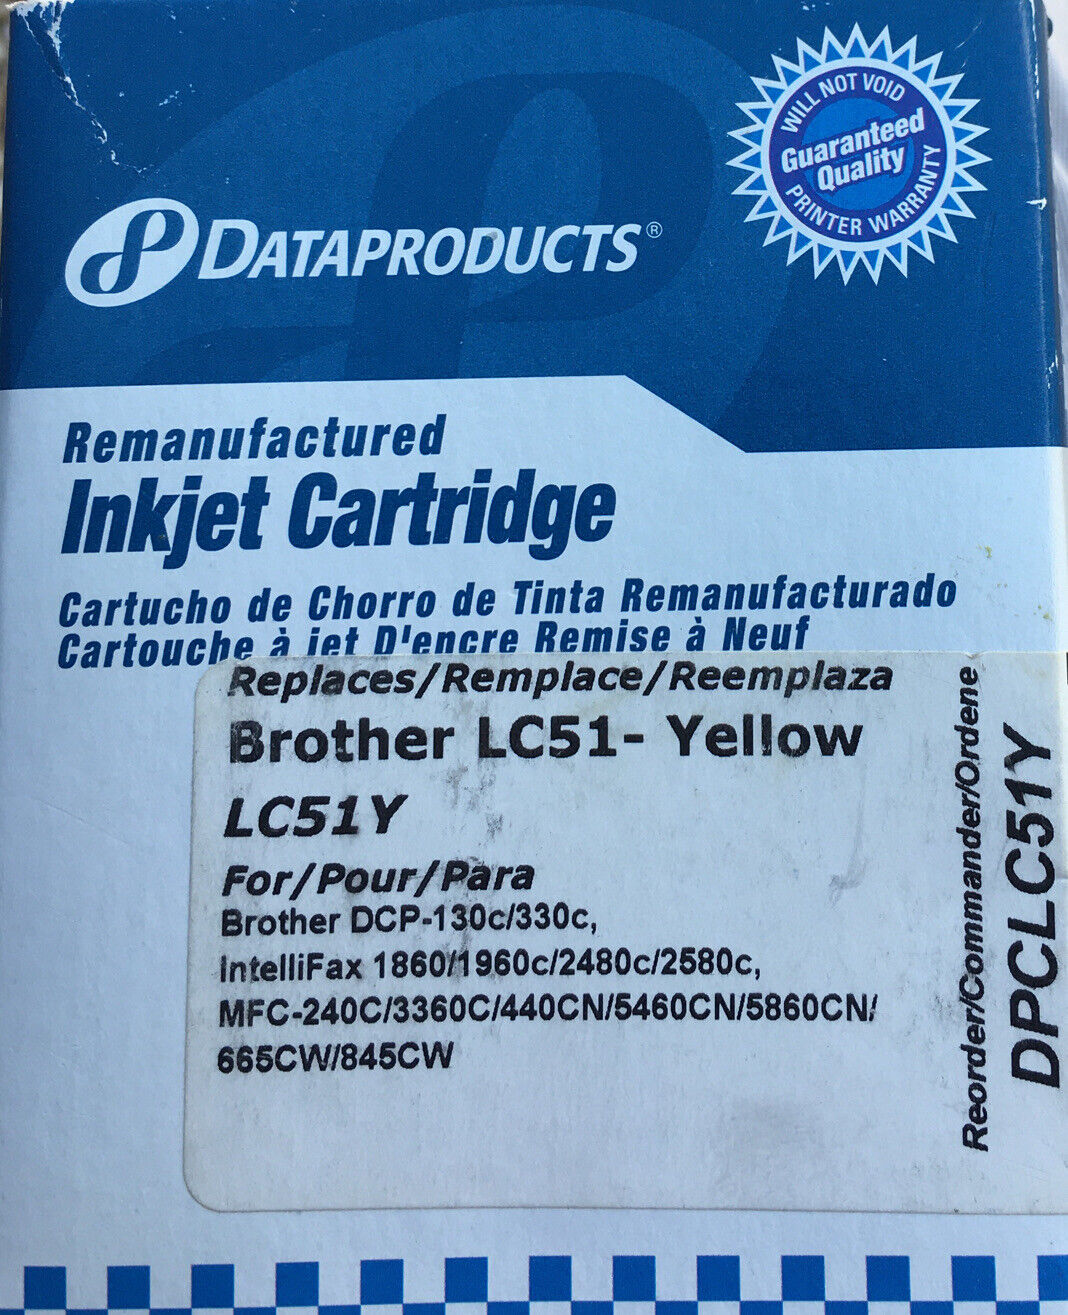 Dataproducts DPCLC51M Remanufactured Ink Cartridge Replacement Brother Yellow-16